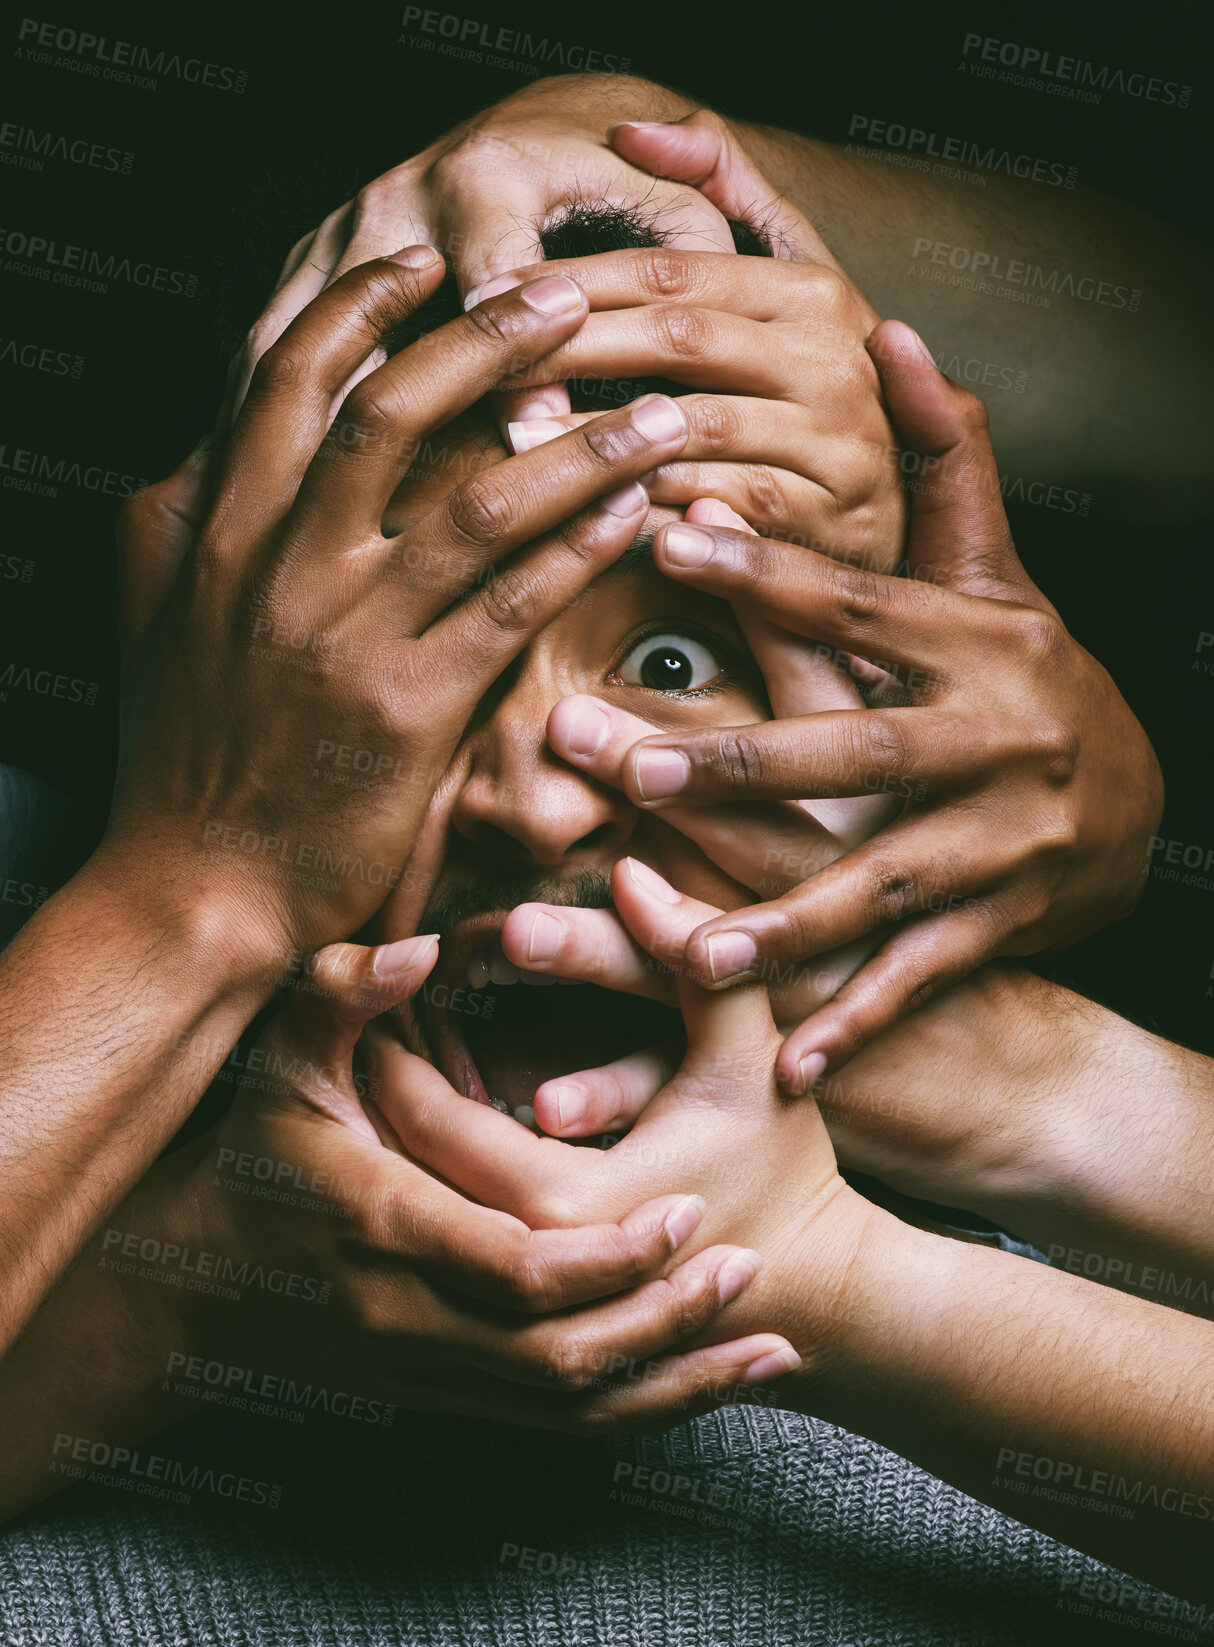 Buy stock photo Shot of hands grabbing a young man’s face against a dark background